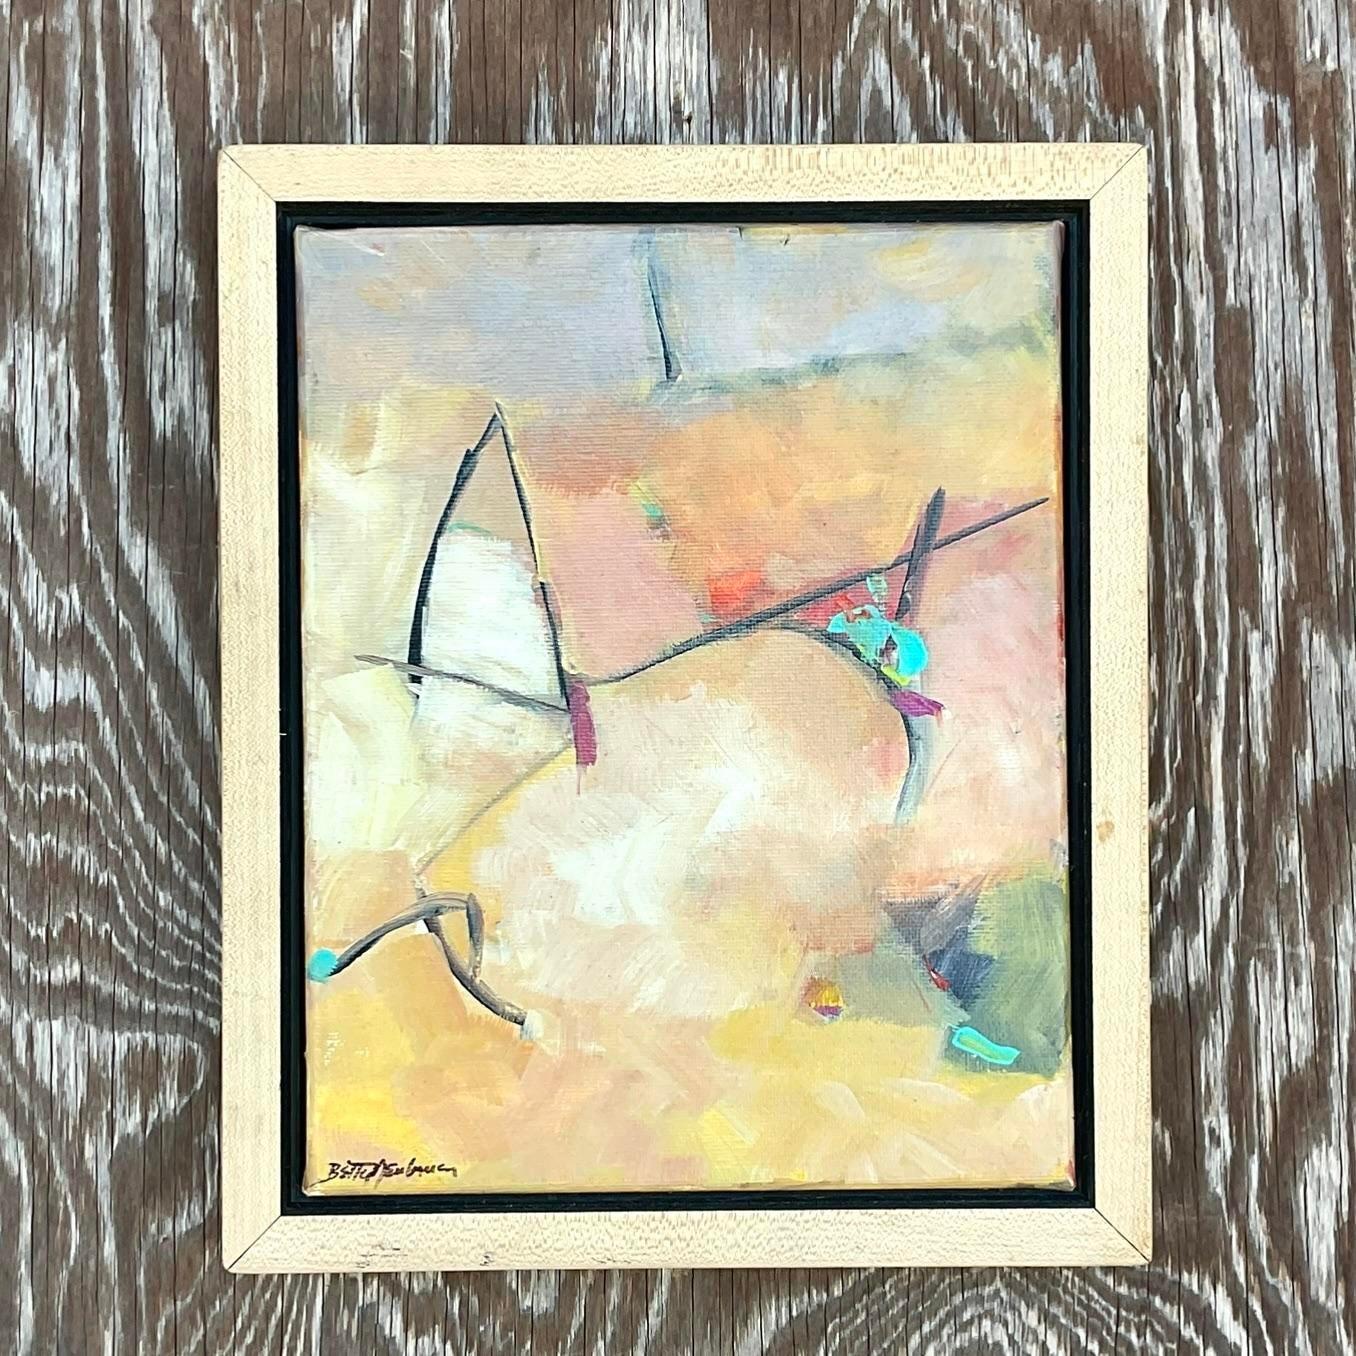 A fabulous vintage Boho Original oil painting. A chic Abstract composition signed by the artist. Acquired from a Palm Beach estate.